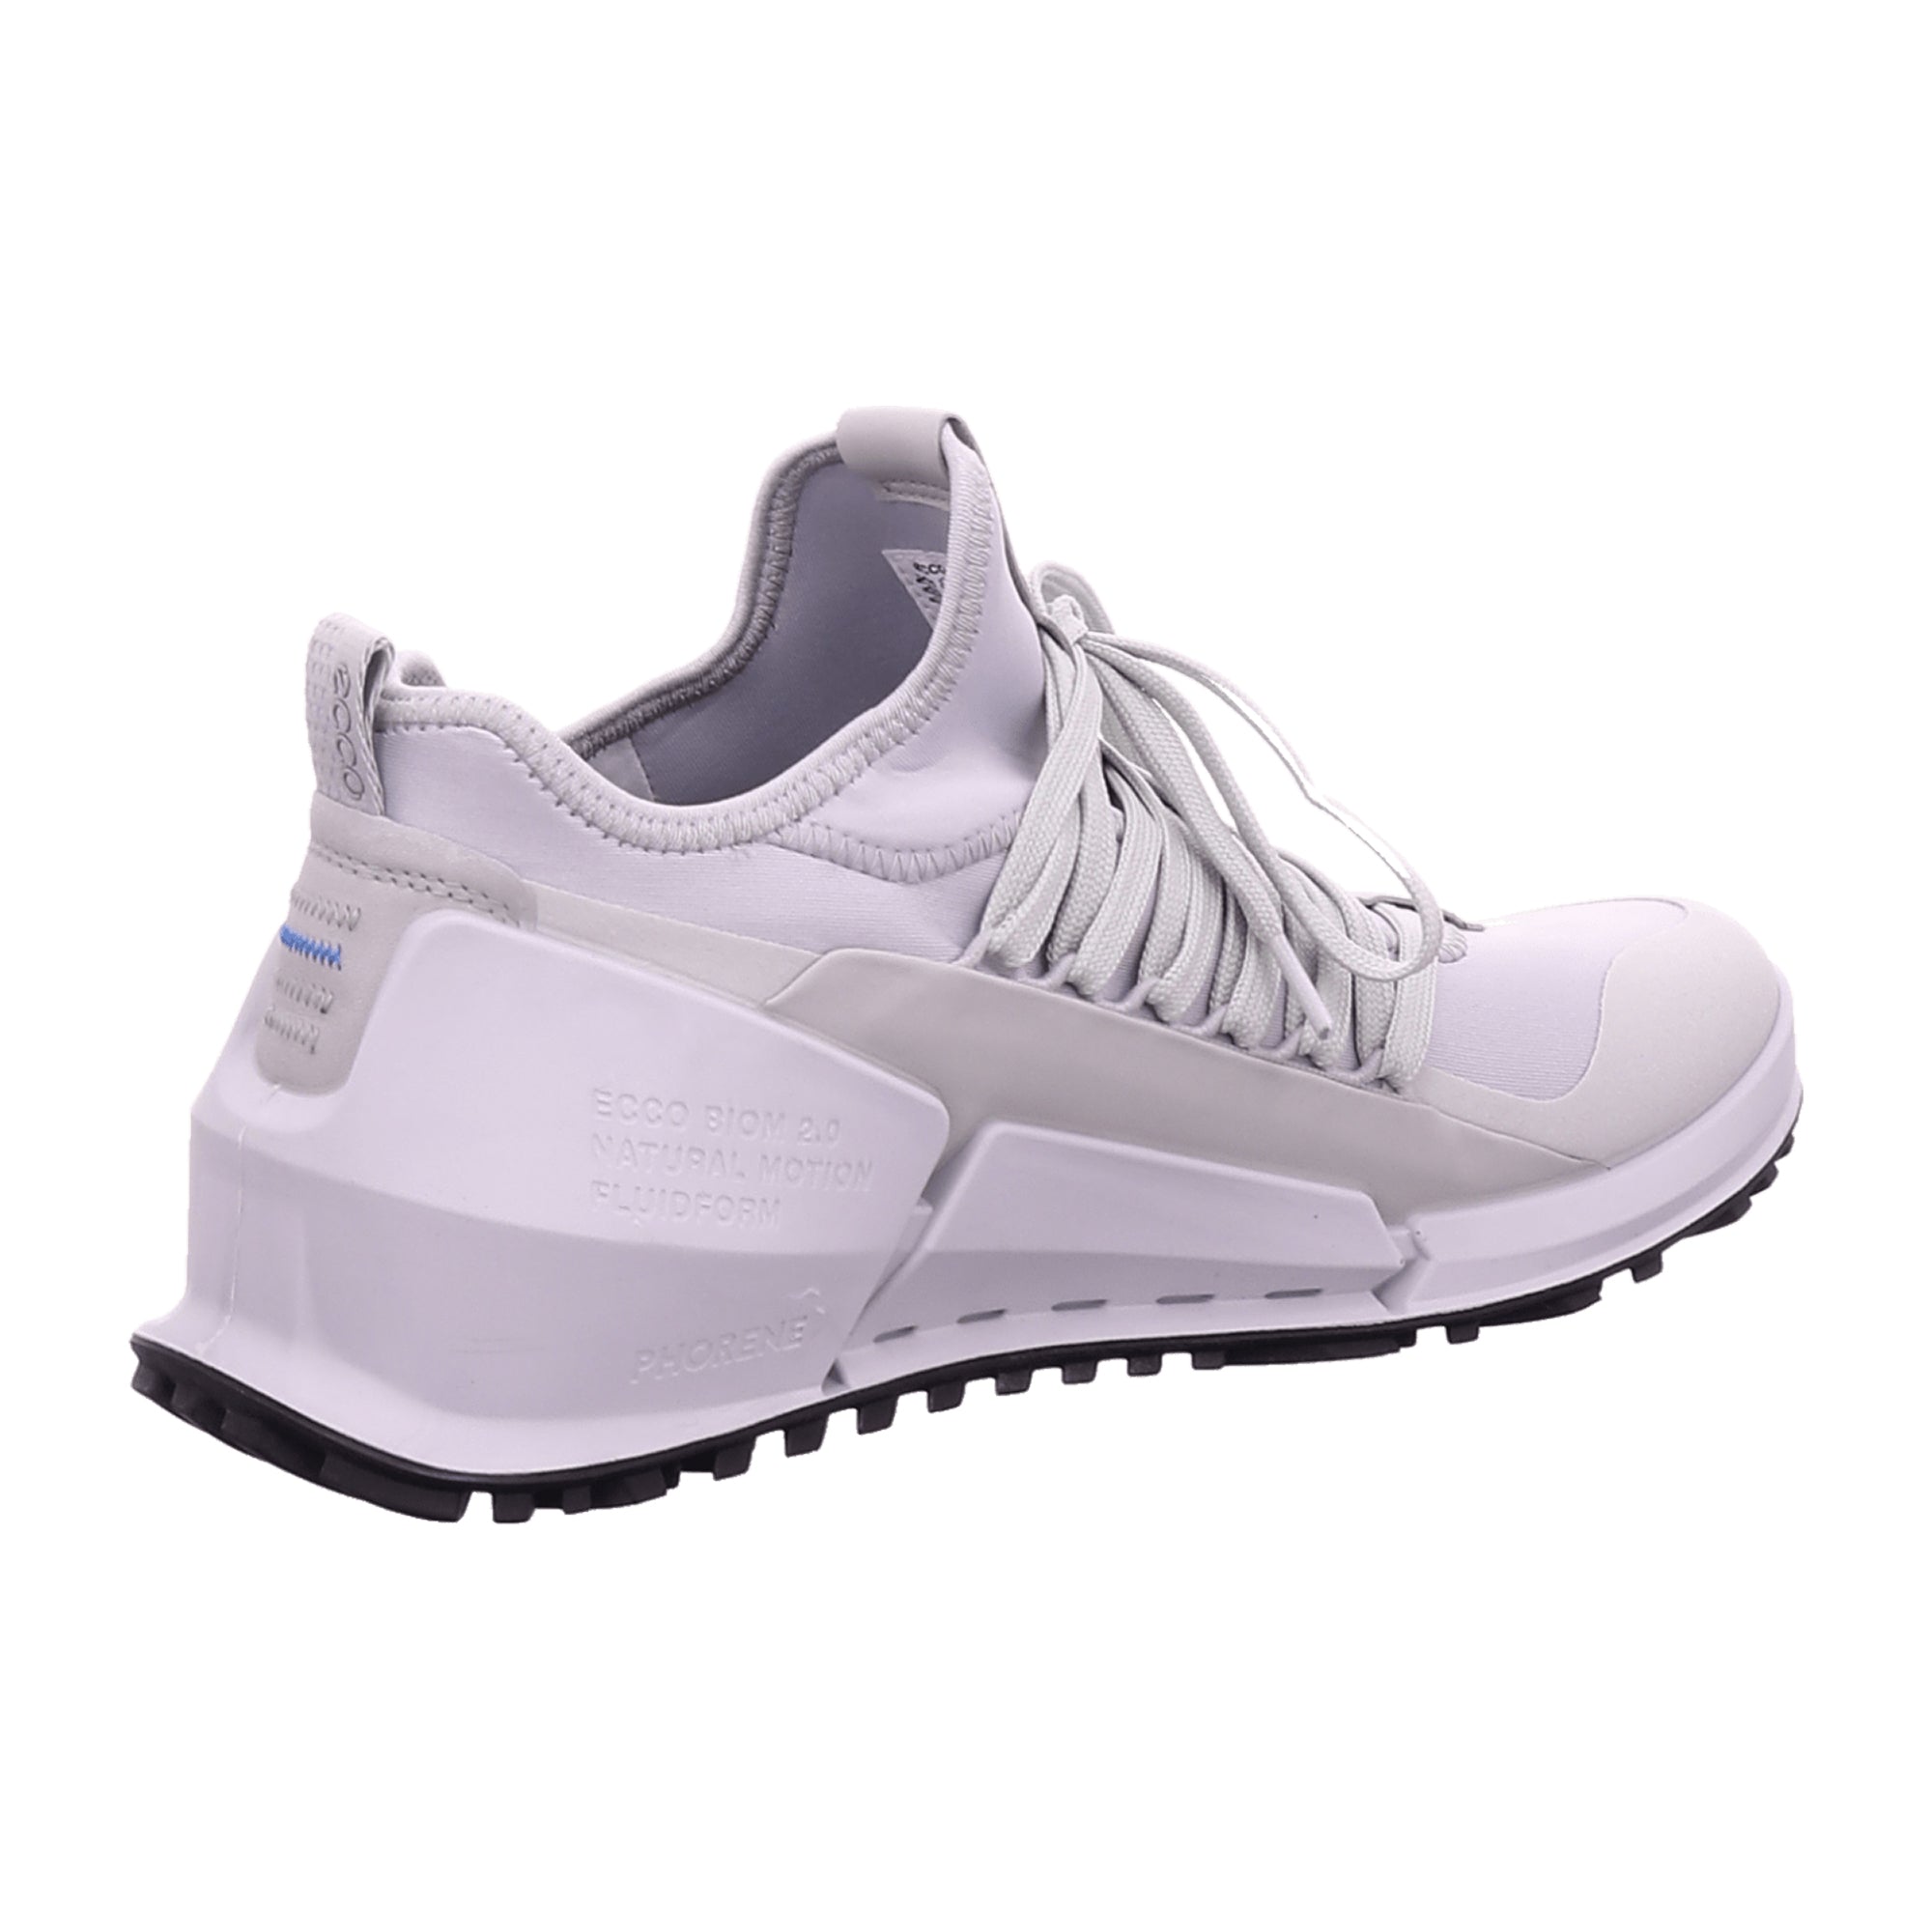 Ecco BIOM 2.0 M Men's Sneakers Grey | Stylish & Comfortable Sports Shoes for Active Lifestyle